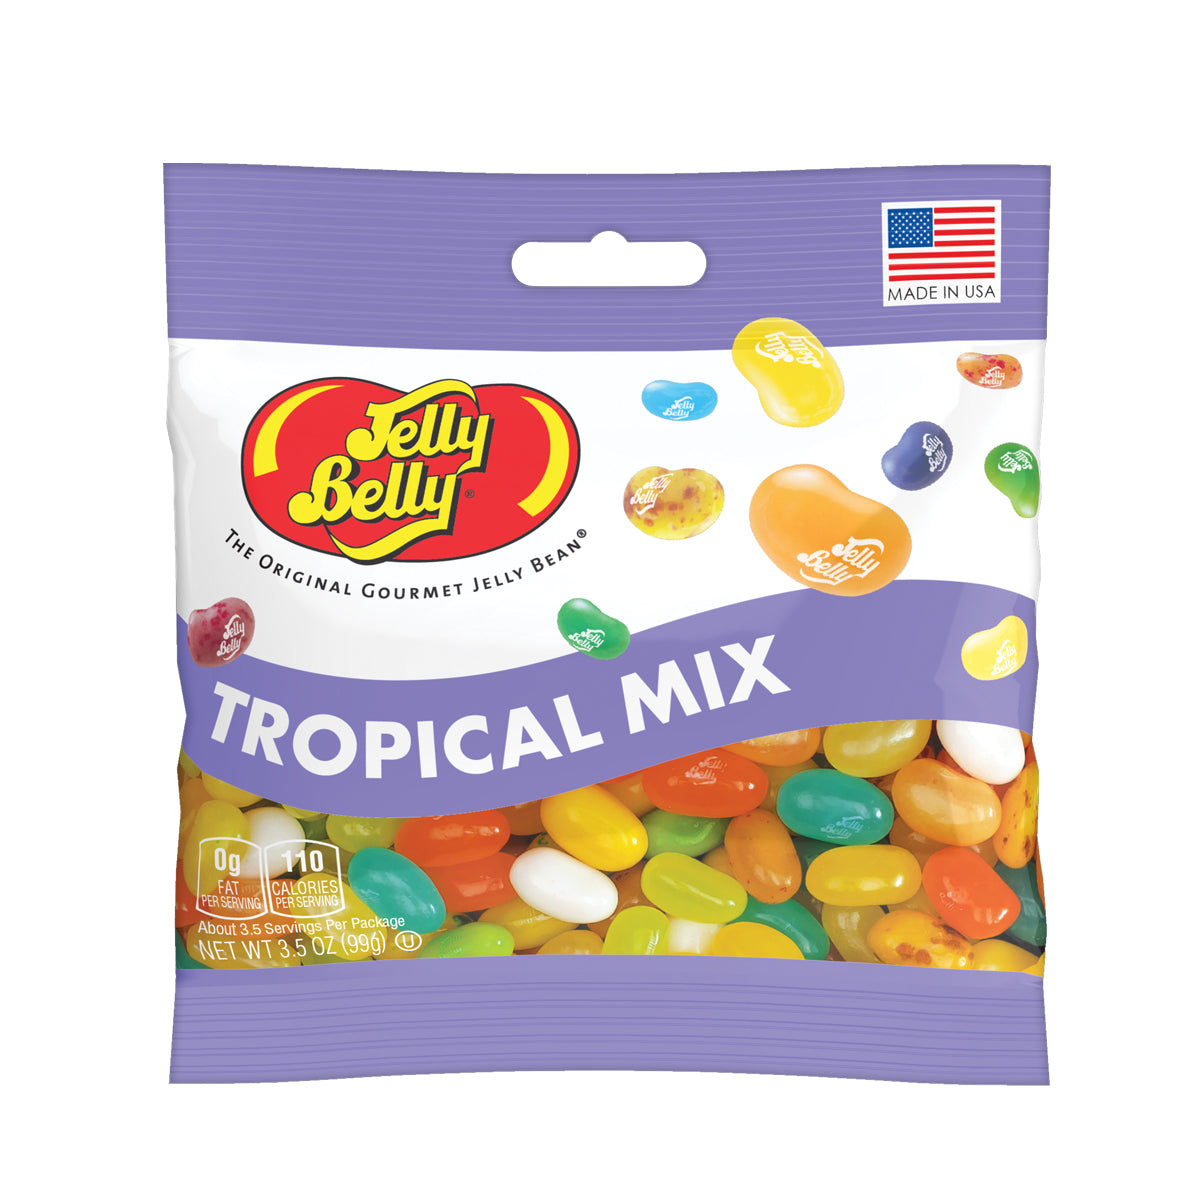 Tropical Mix Jelly Belly Bag Cover